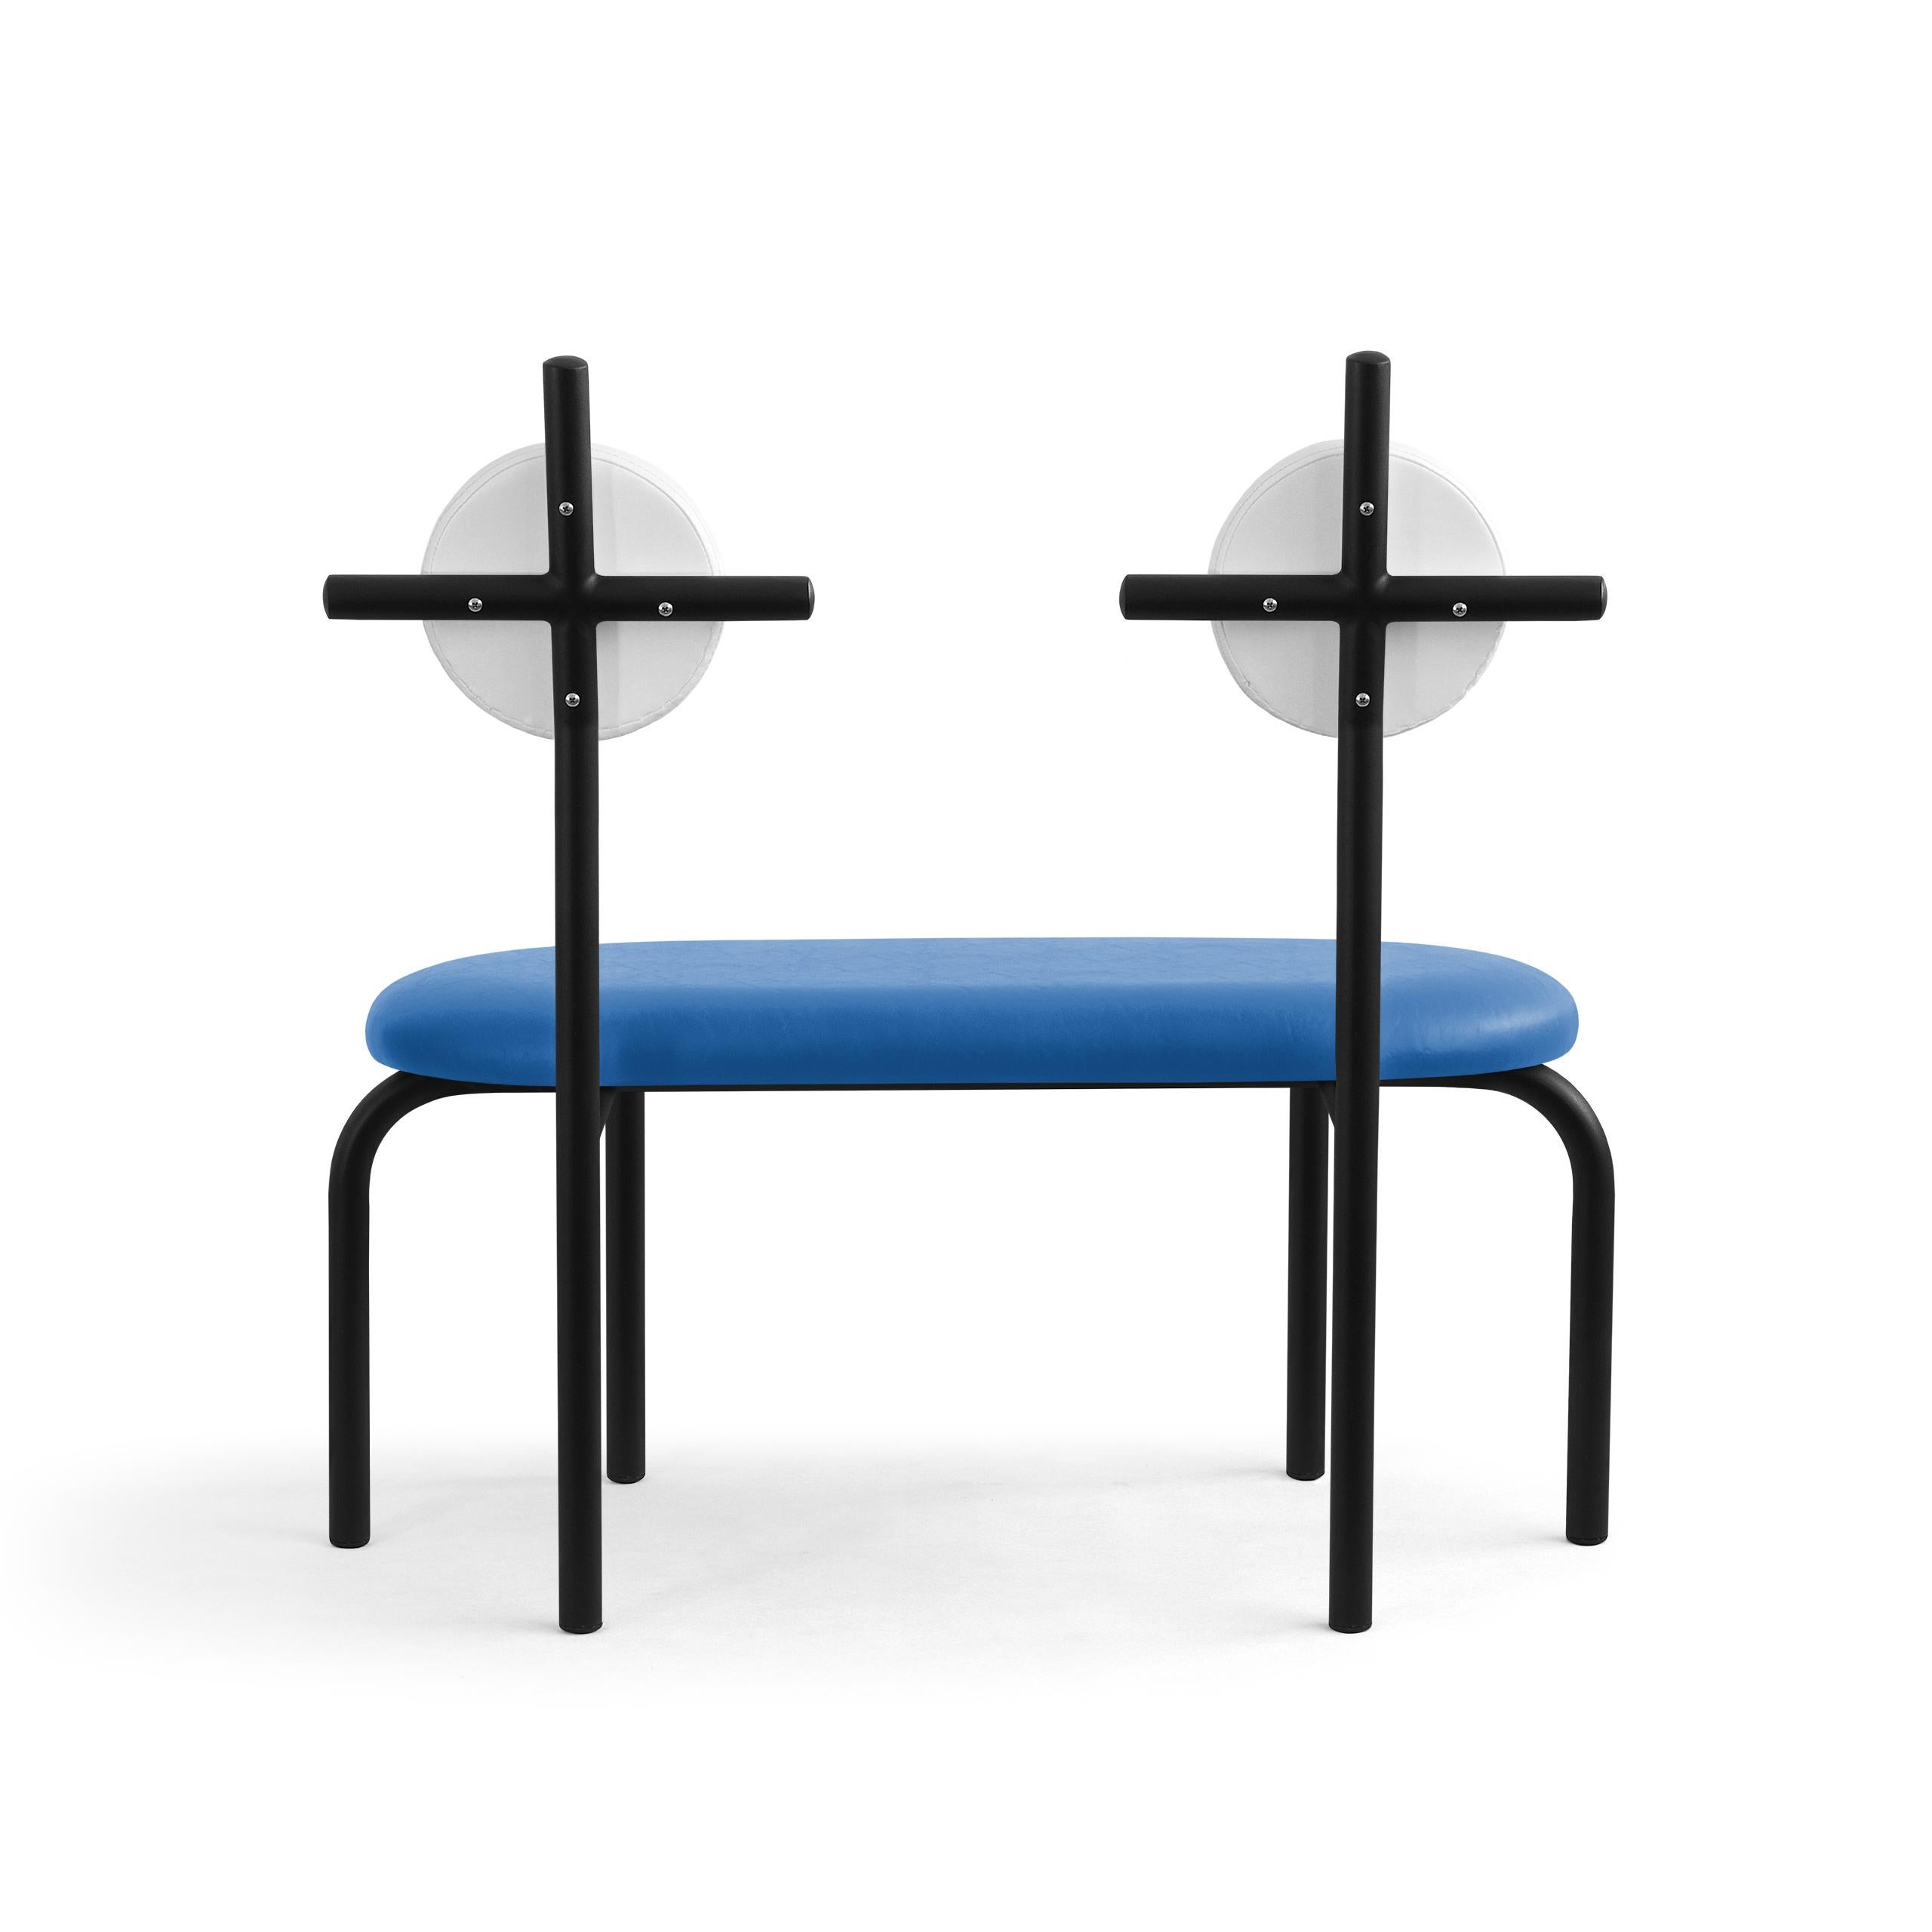 PK17 Impermeable Loveseat, Blue Seat & Black Metal Structure by Paulo Kobylka In New Condition For Sale In Londrina, Paraná